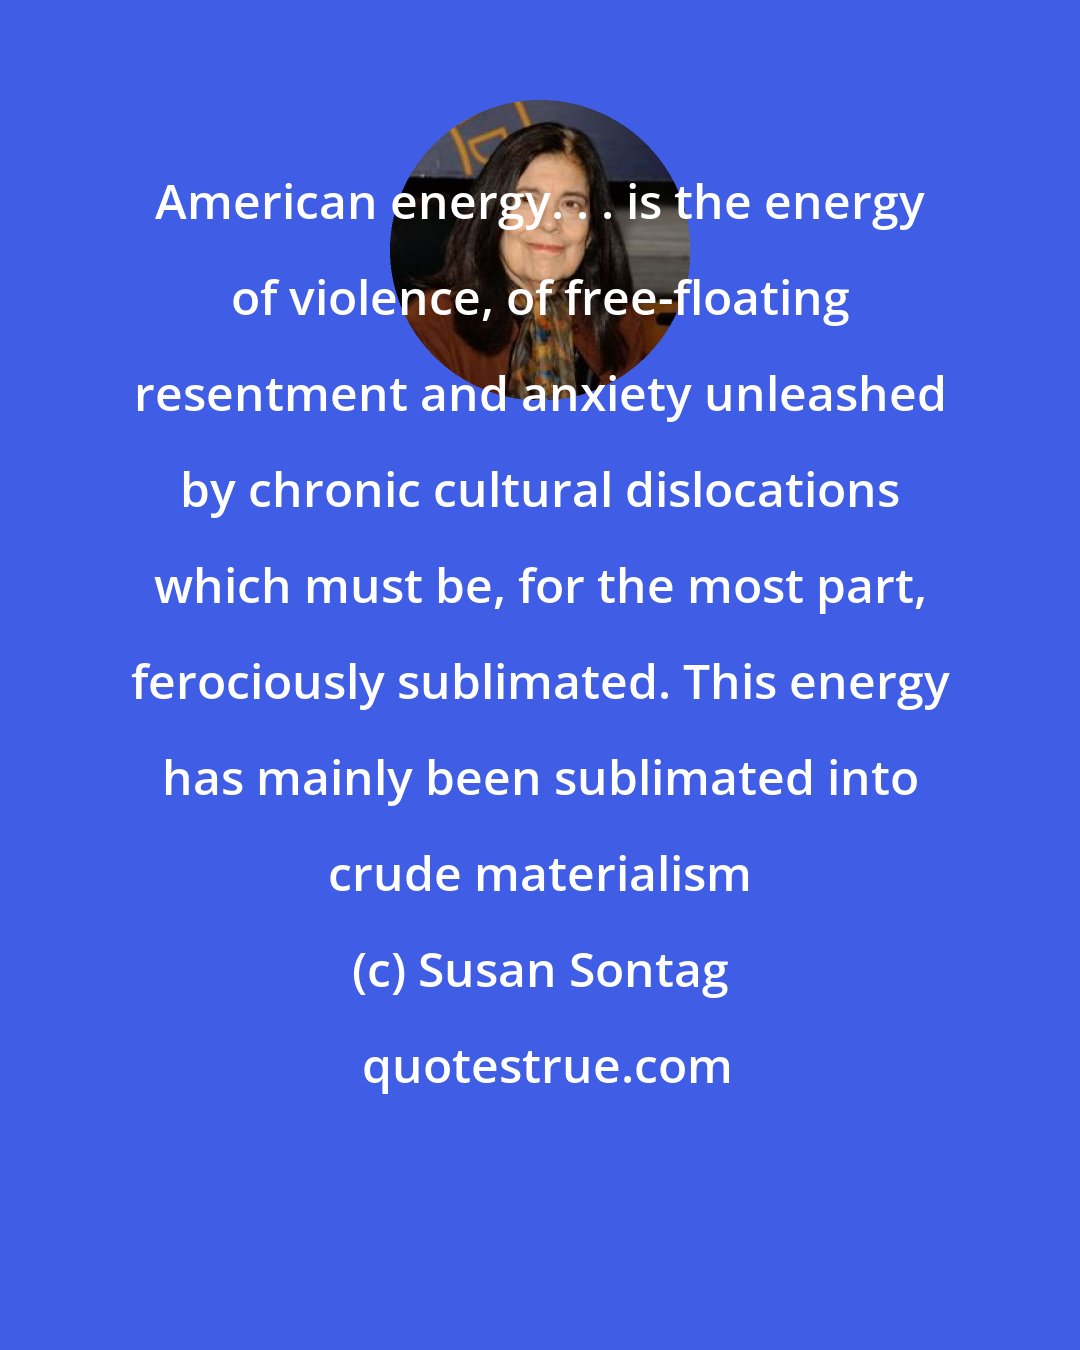 Susan Sontag: American energy. . . is the energy of violence, of free-floating resentment and anxiety unleashed by chronic cultural dislocations which must be, for the most part, ferociously sublimated. This energy has mainly been sublimated into crude materialism